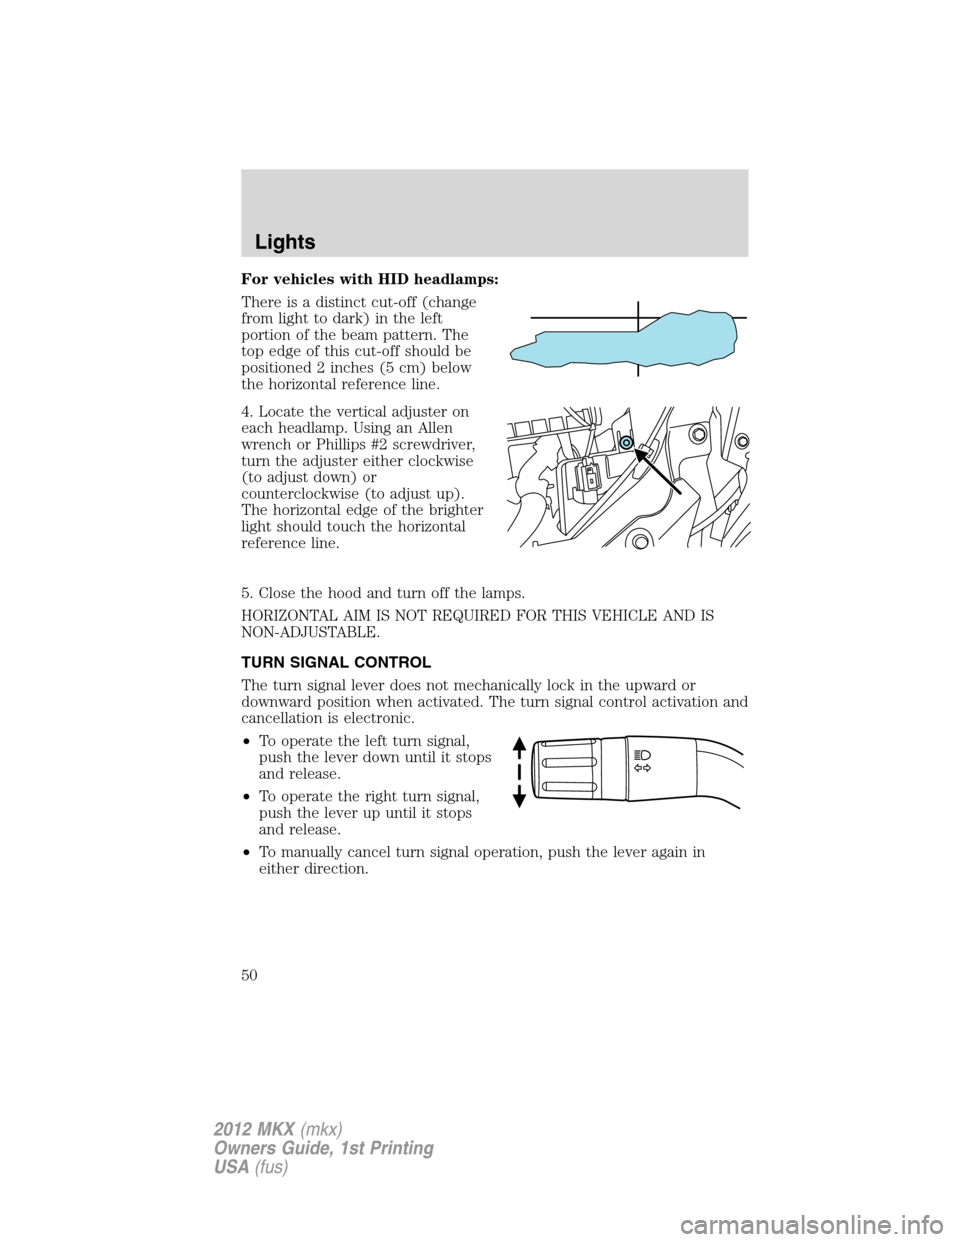 LINCOLN MKX 2012 Service Manual For vehicles with HID headlamps:
There is a distinct cut-off (change
from light to dark) in the left
portion of the beam pattern. The
top edge of this cut-off should be
positioned 2 inches (5 cm) belo